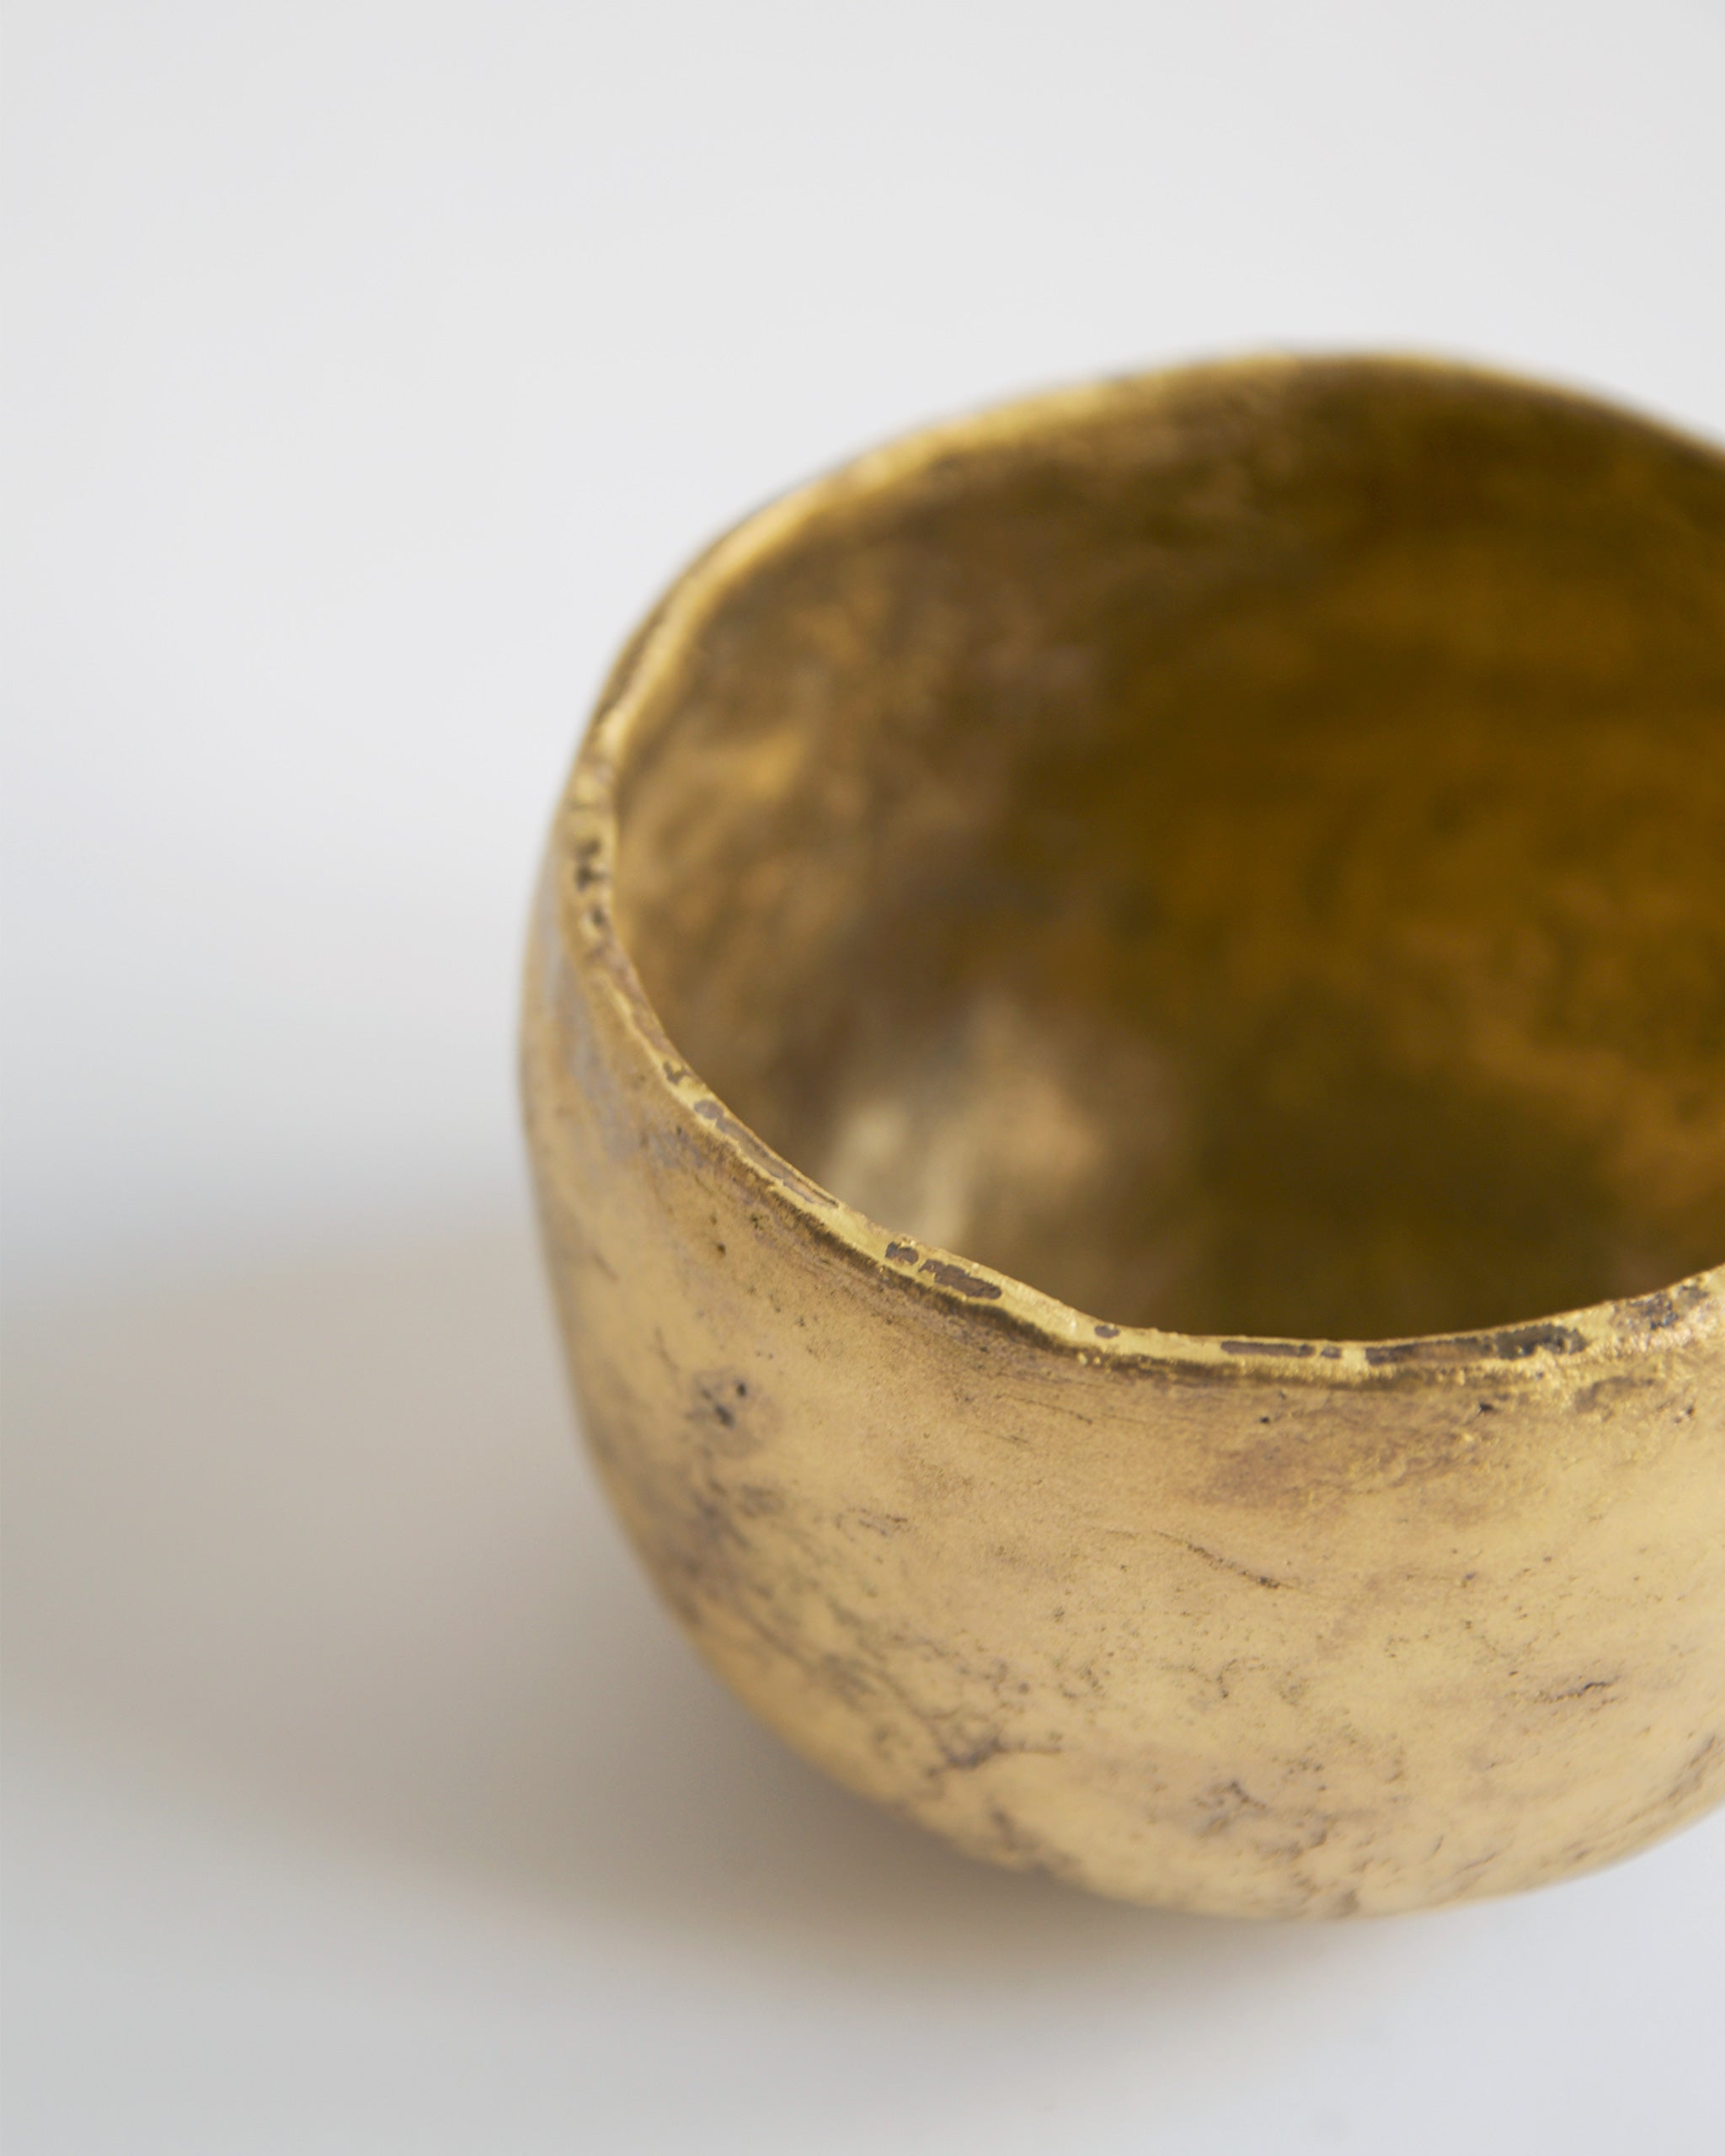 Cropped detail image of the Gold Chawan VI from a top view.